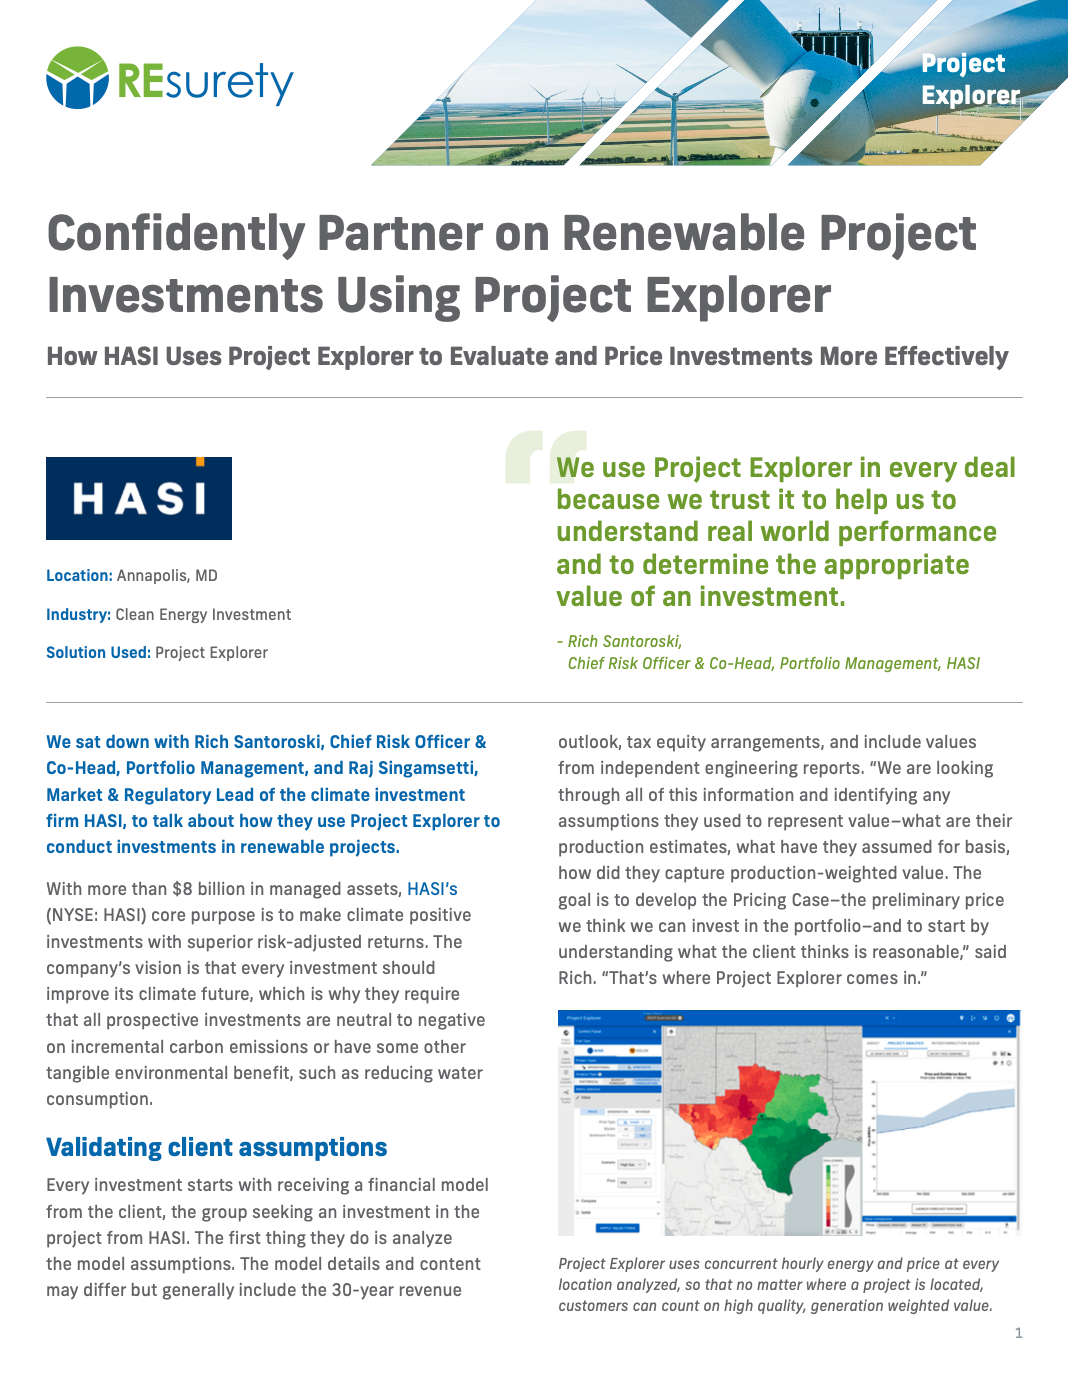 Confidently Partner on Renewable Project Investments Using REsurety: HASI Case Study